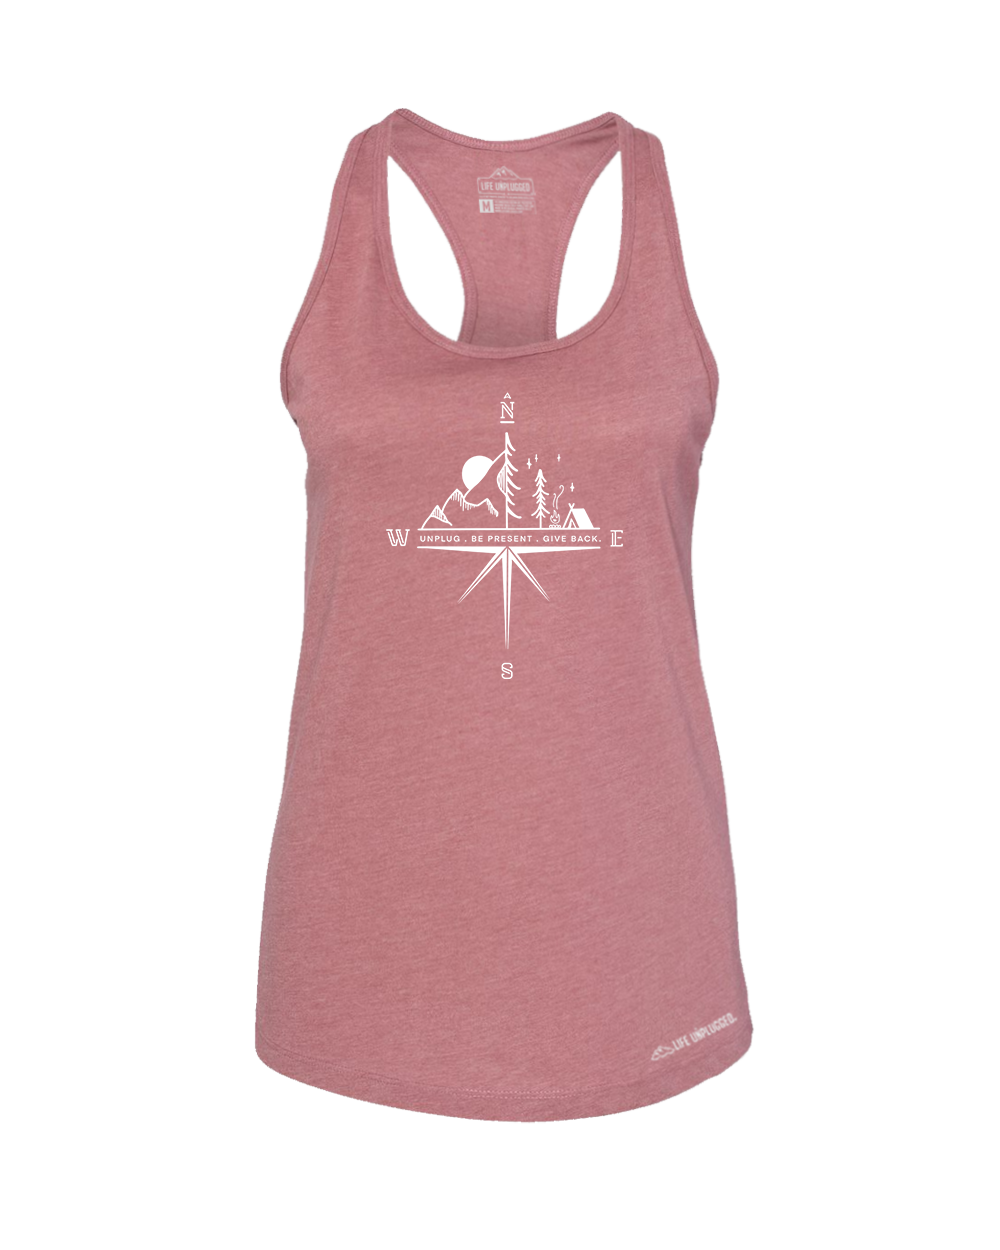 Compass Mountain Scene Premium Women's Relaxed Fit Racerback Tank Top - Life Unplugged